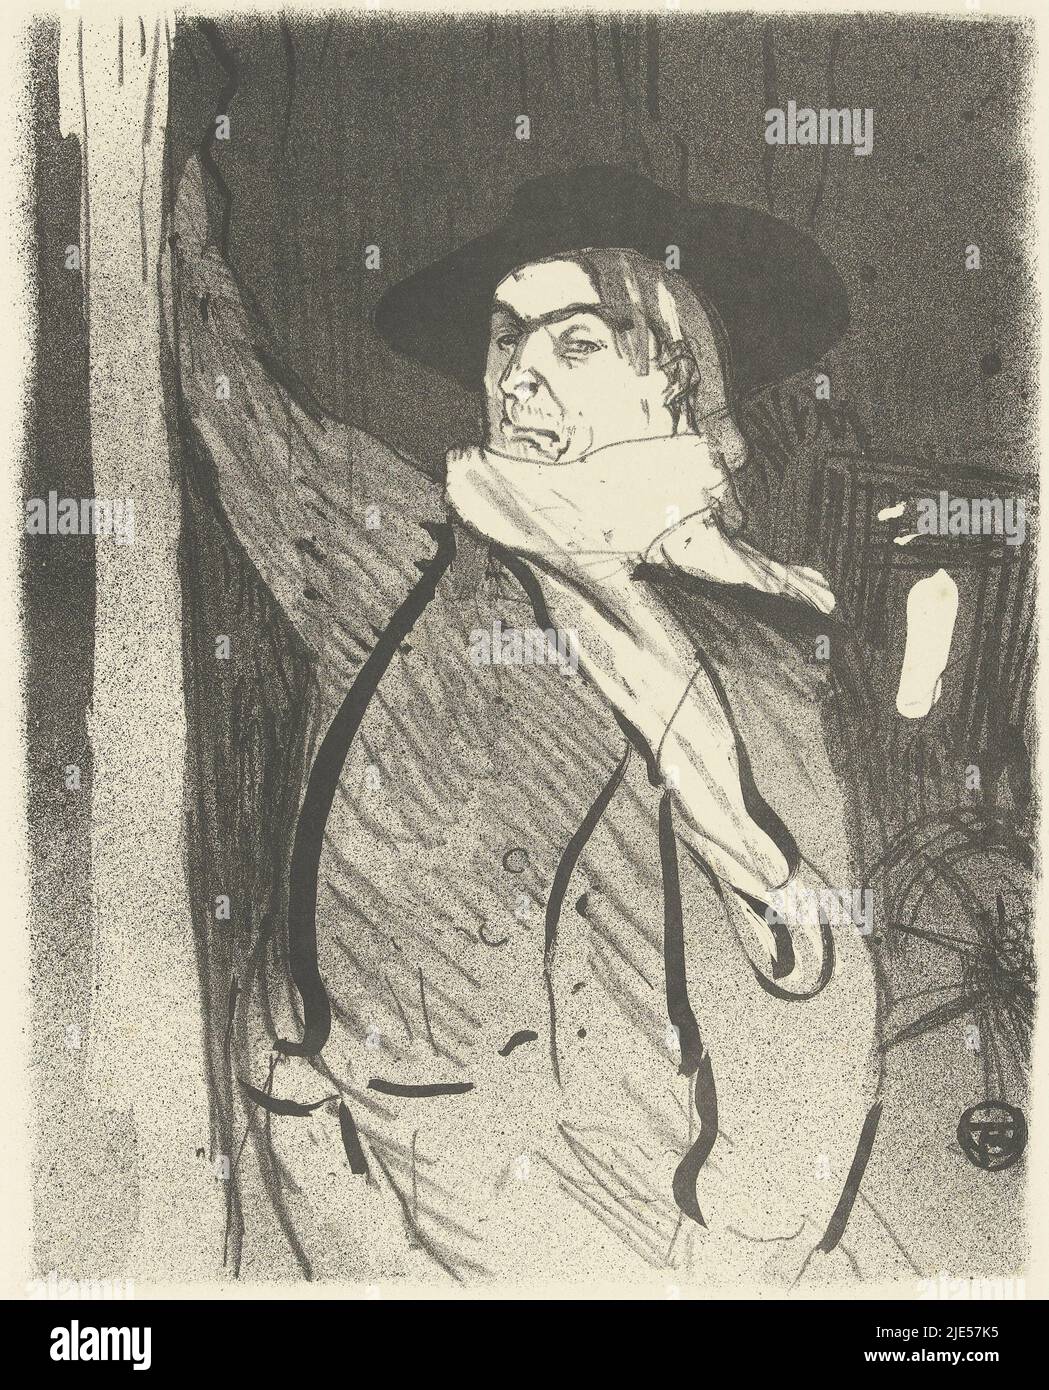 Aristide Bruant always performed in Les Ambassadeurs in the costume in which he was immortalized by Toulouse-Lautrec: a big hat, velvet cardigan, a red foulard and boots, Portrait of singer and cabaret artist Aristide Bruant Le cafe concert (series title)., print maker: Henri de Toulouse-Lautrec, (signed by artist), publisher: André Marty, printer: Edward Ancourt, 1893, paper, h 268 mm × w 215 mm, h 434 mm × w 323 mm Stock Photo